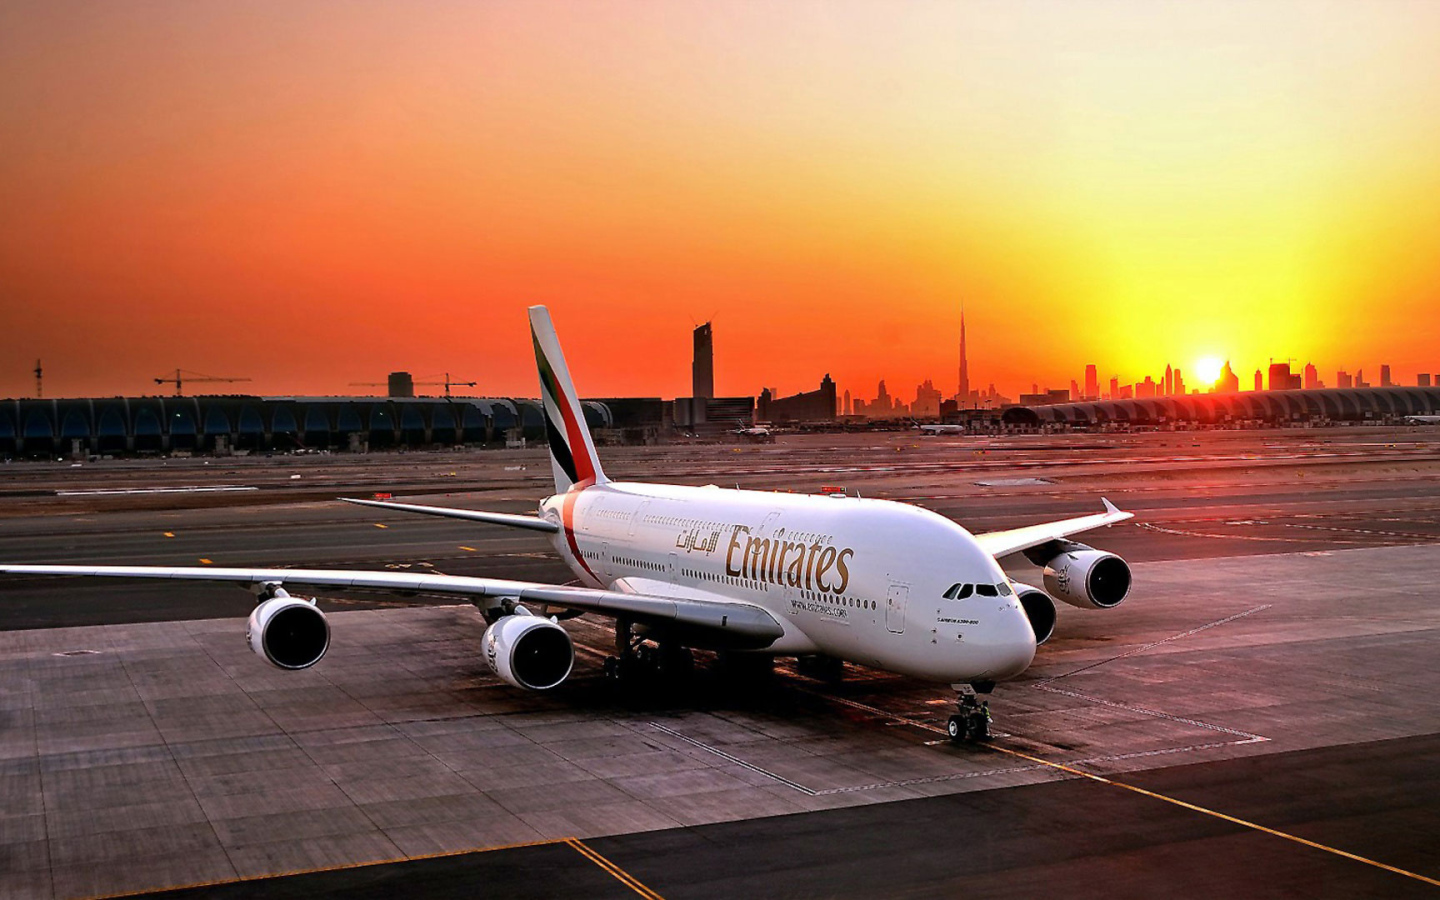 Airbus A380 Emirates airline on the sunset background